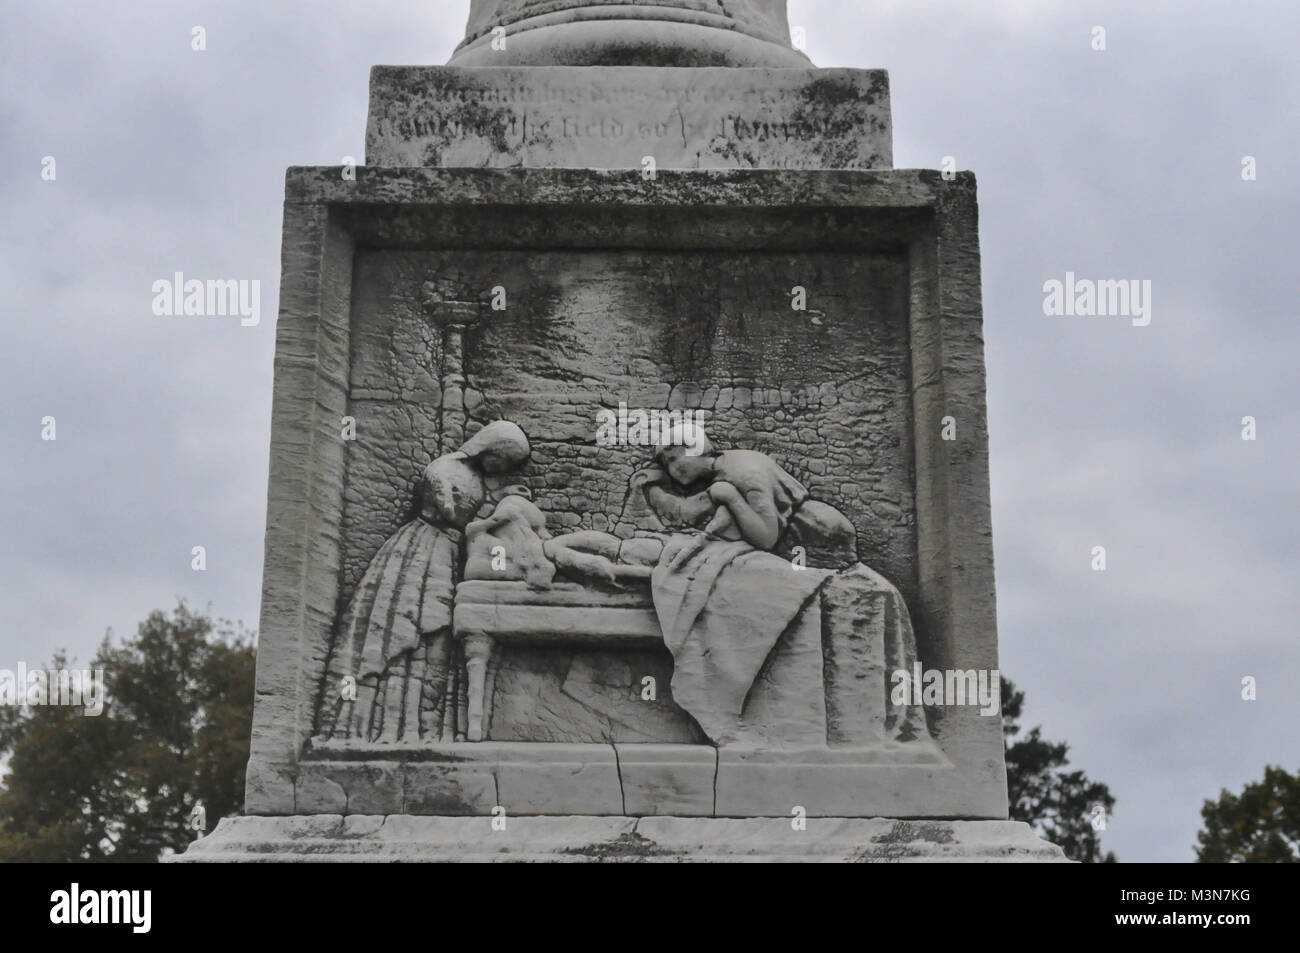 Statue of People Tending to a Loved One on their Deathbed Stock Photo